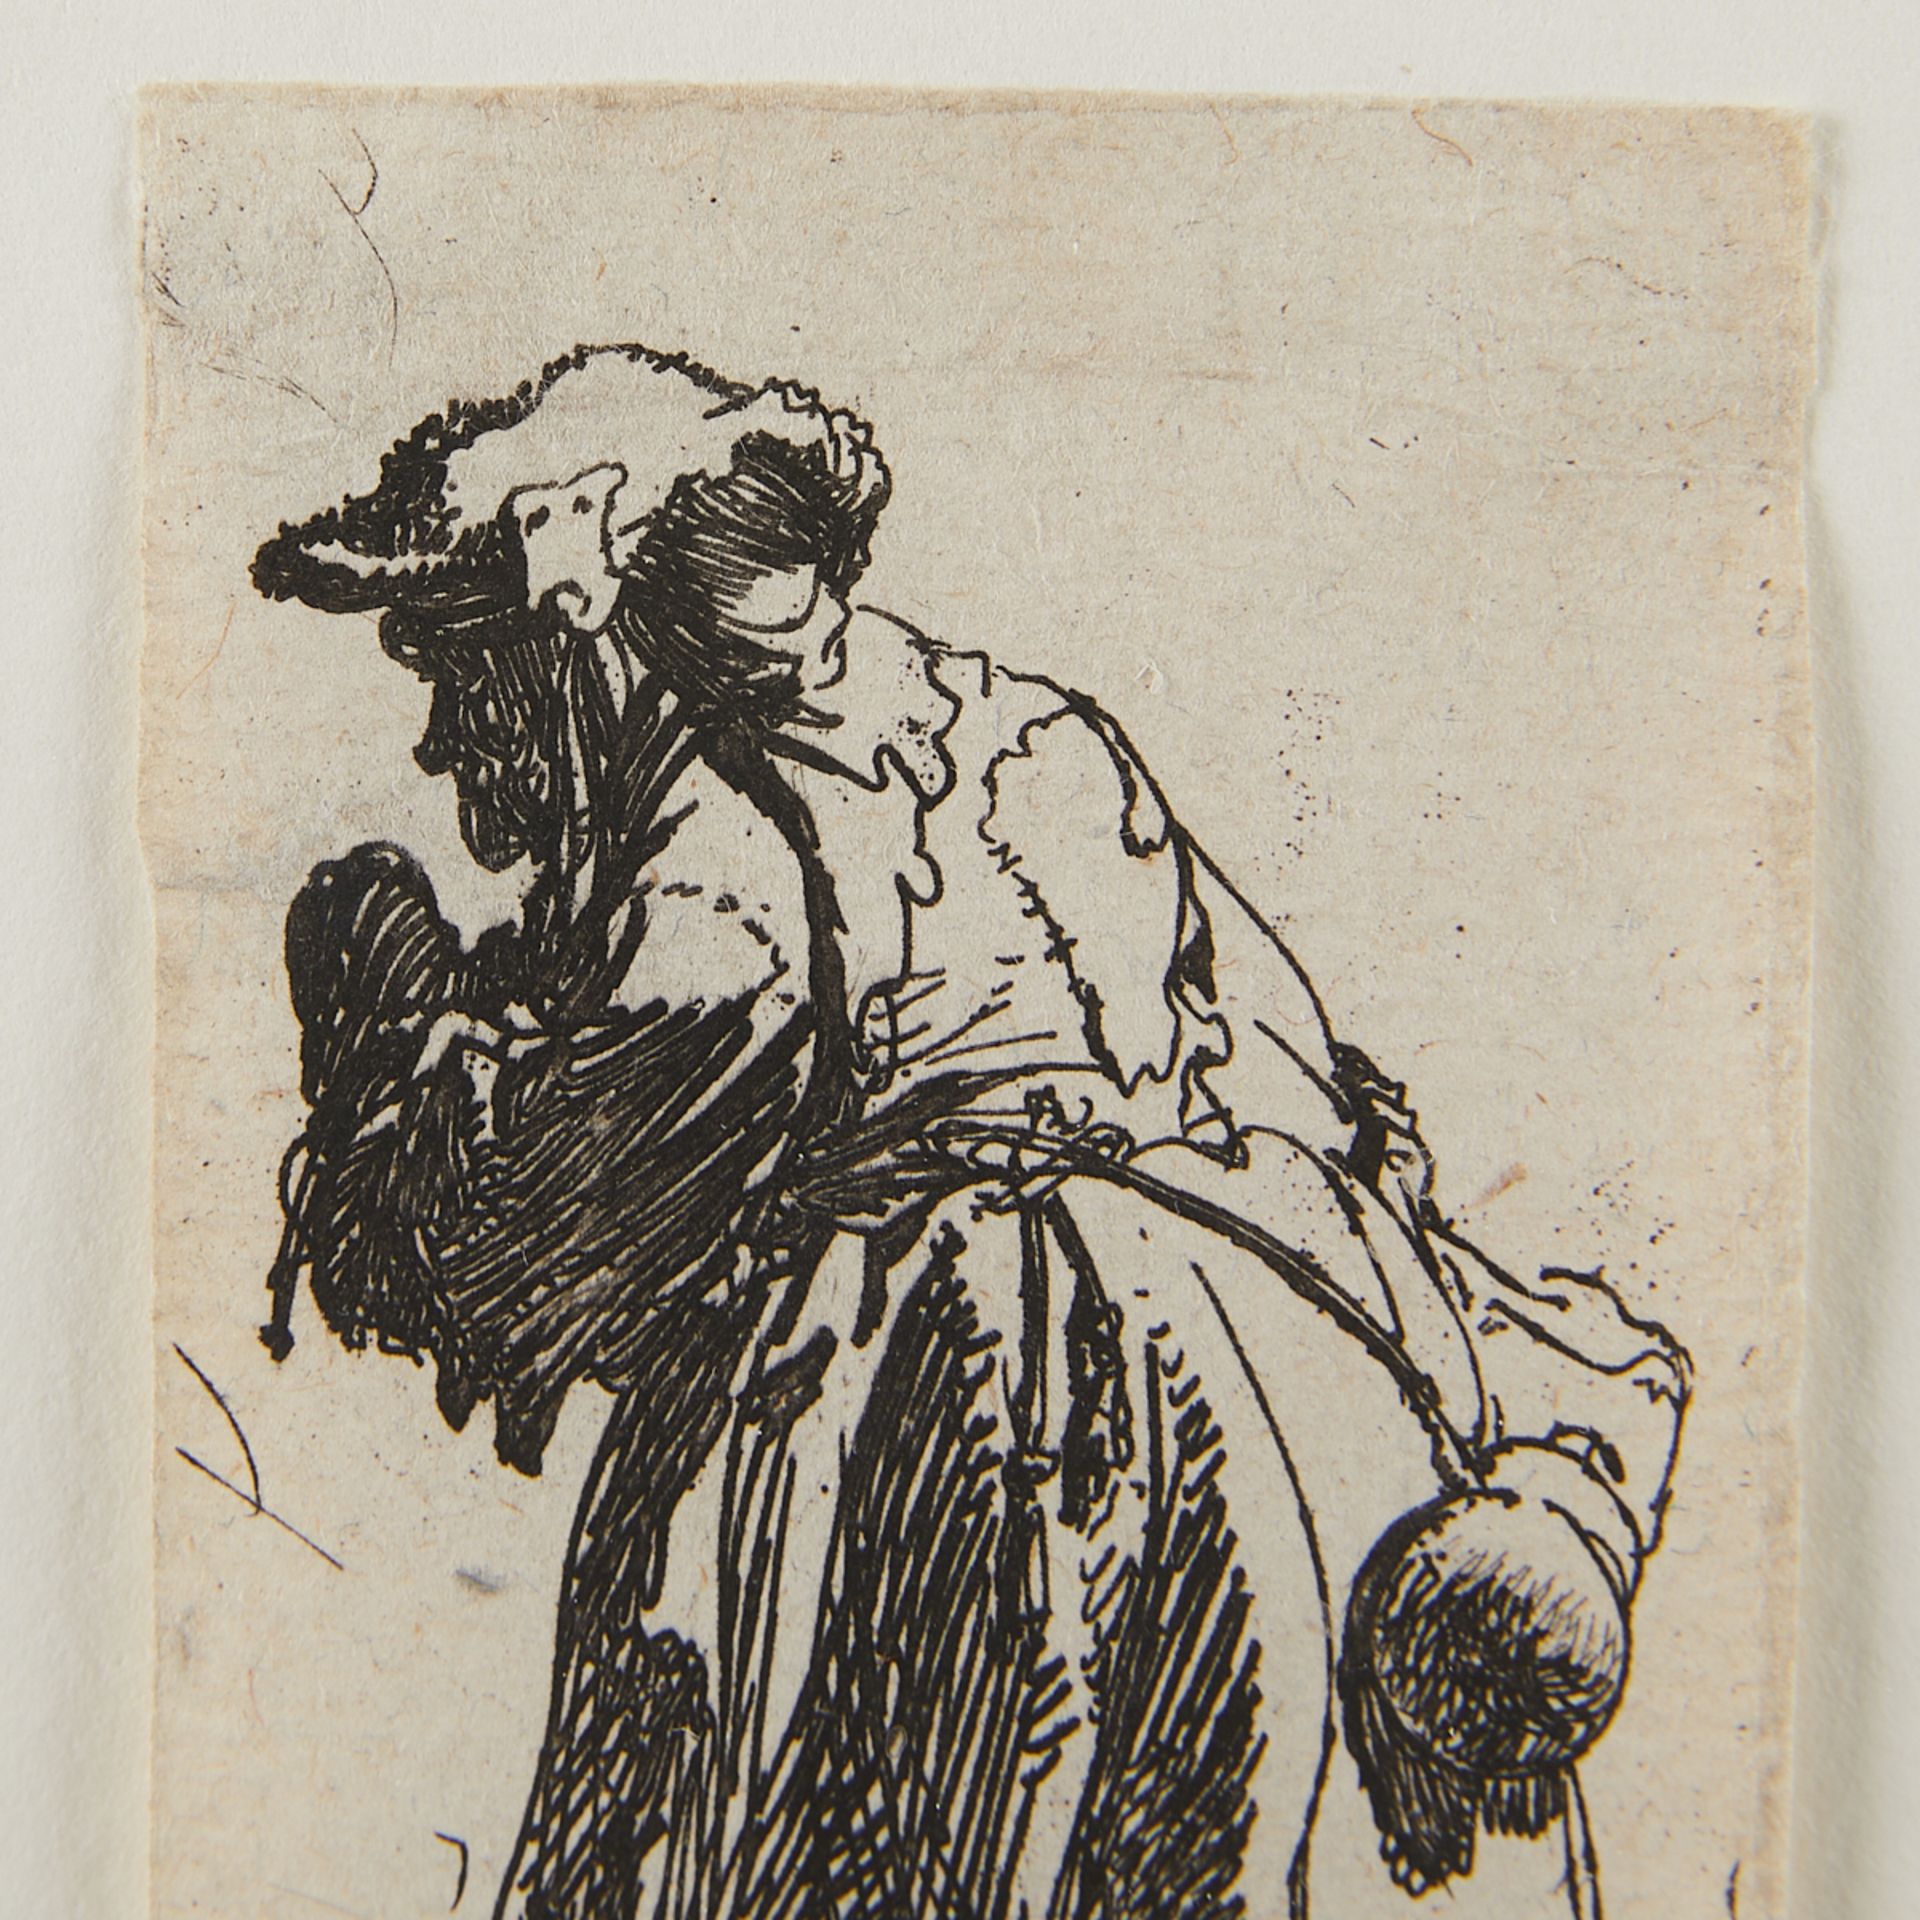 26 Etchings Jacques Callot "The Beggers" Suite - Image 5 of 25